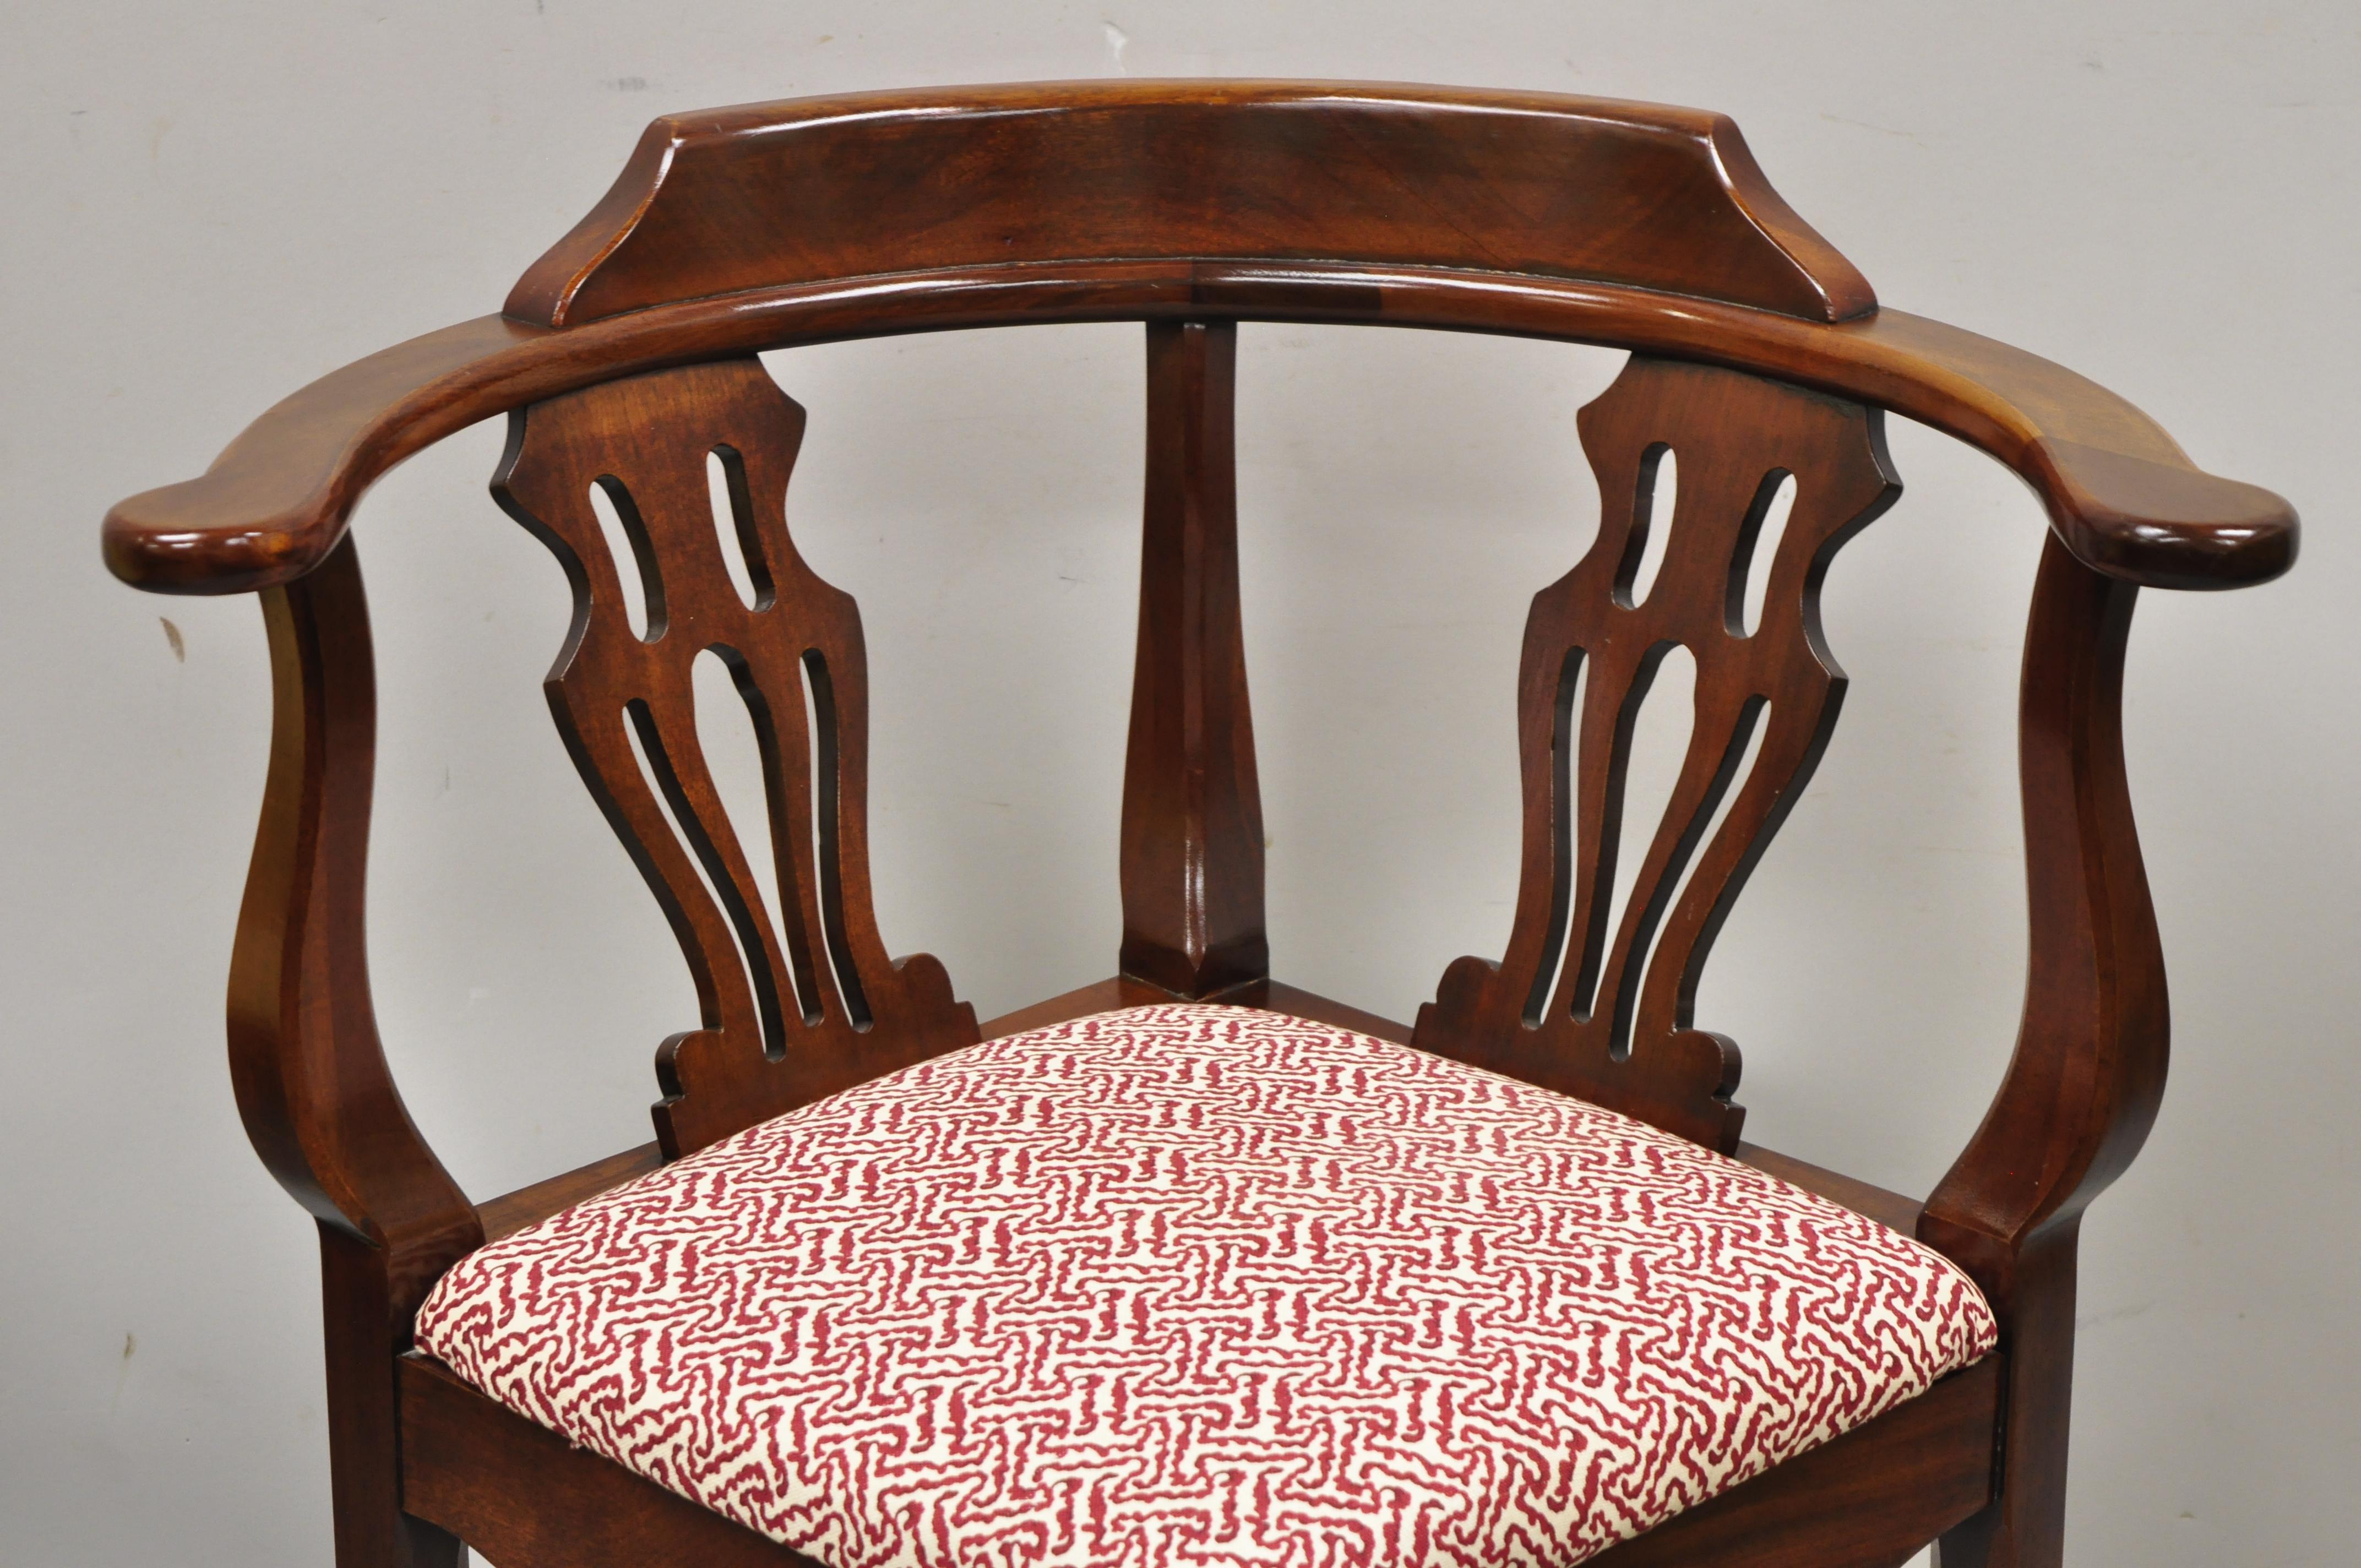 Statesville Ross vintage Mahogany Georgian Chippendale style corner chair. Item features solid wood construction, nicely carved details, quality American craftsmanship, original label, great style and form. Measurements: 32